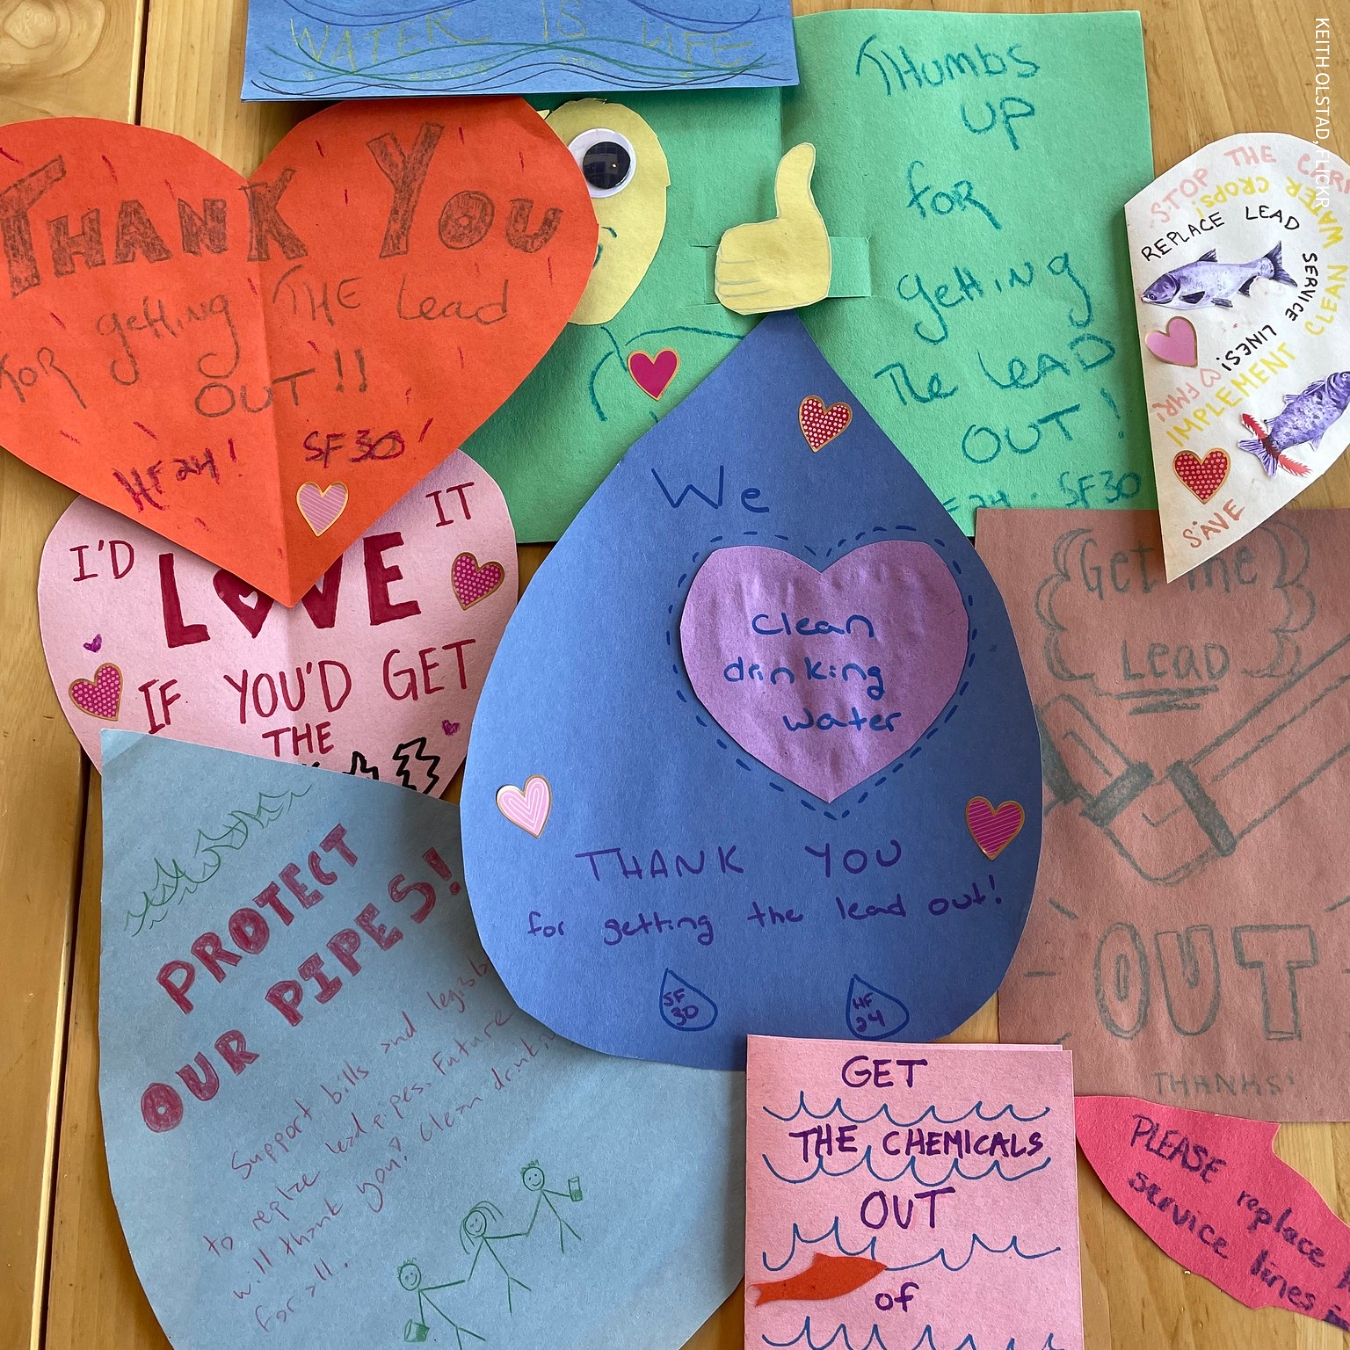 A collection of handmade Valentine's Day cards on colored construction paper. All have messages written in marker about replacing lead service lines.